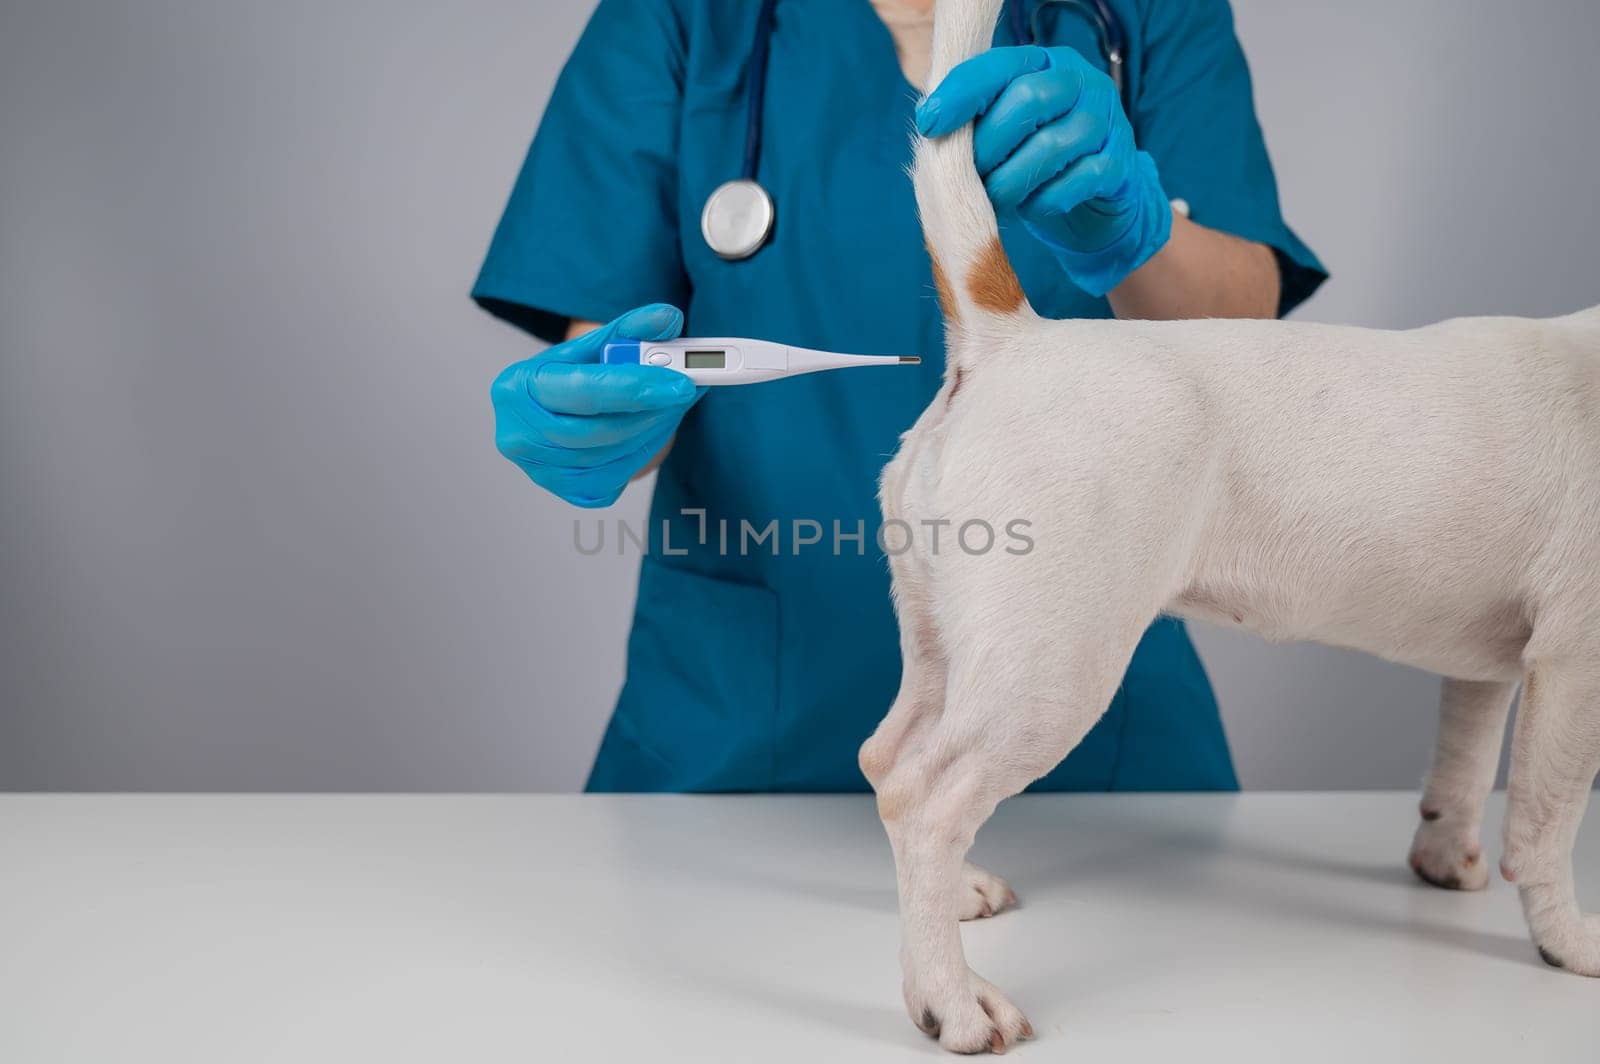 A veterinarian measures a dog's temperature rectally with an electronic thermometer. by mrwed54